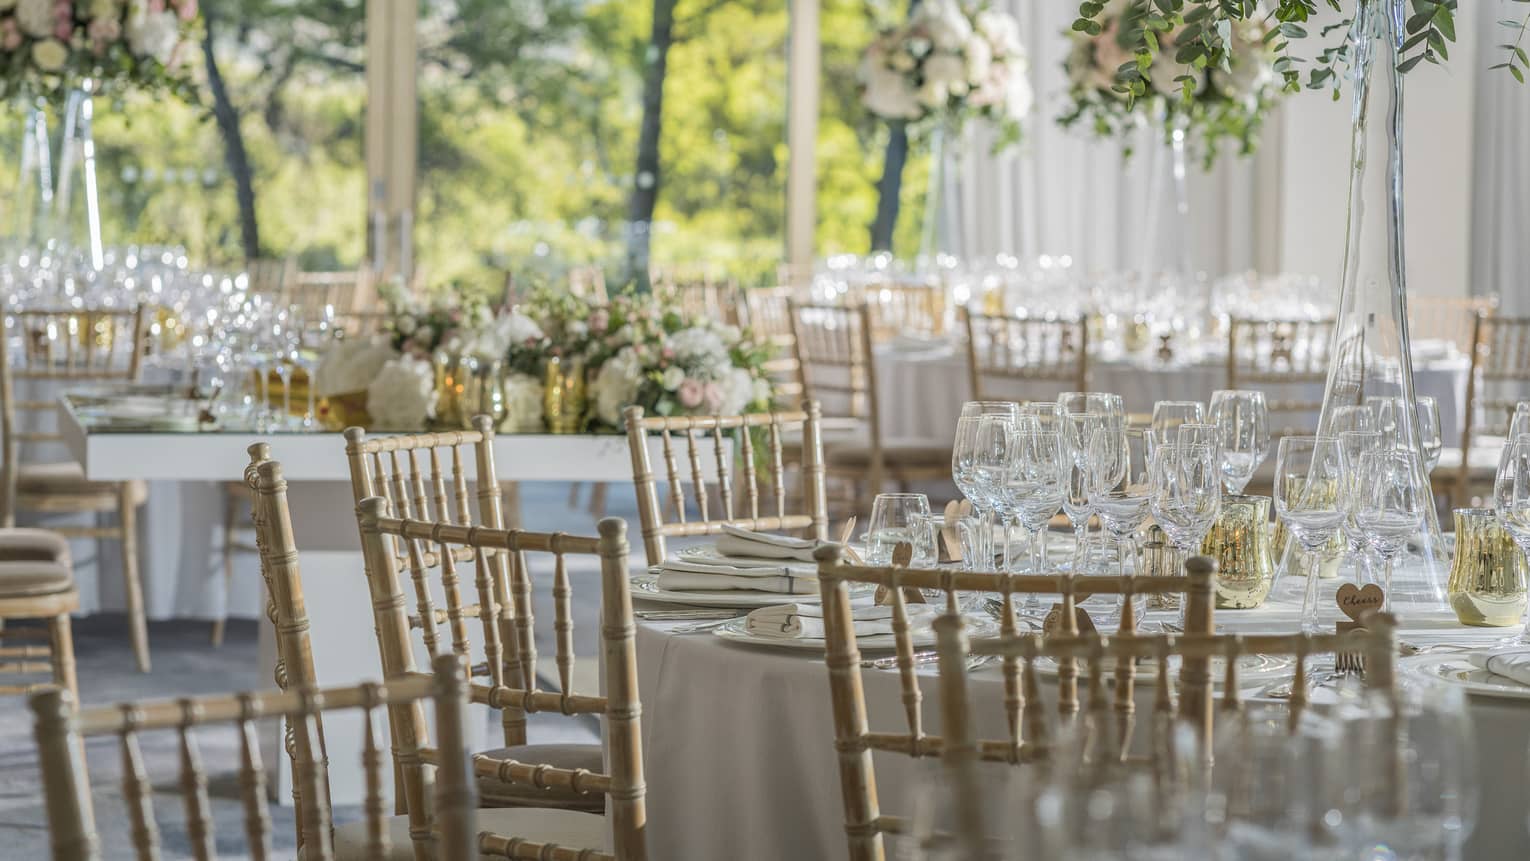 Round table with wooden chairs, place settings, glasses, floral display, in sunny room overlooking trees